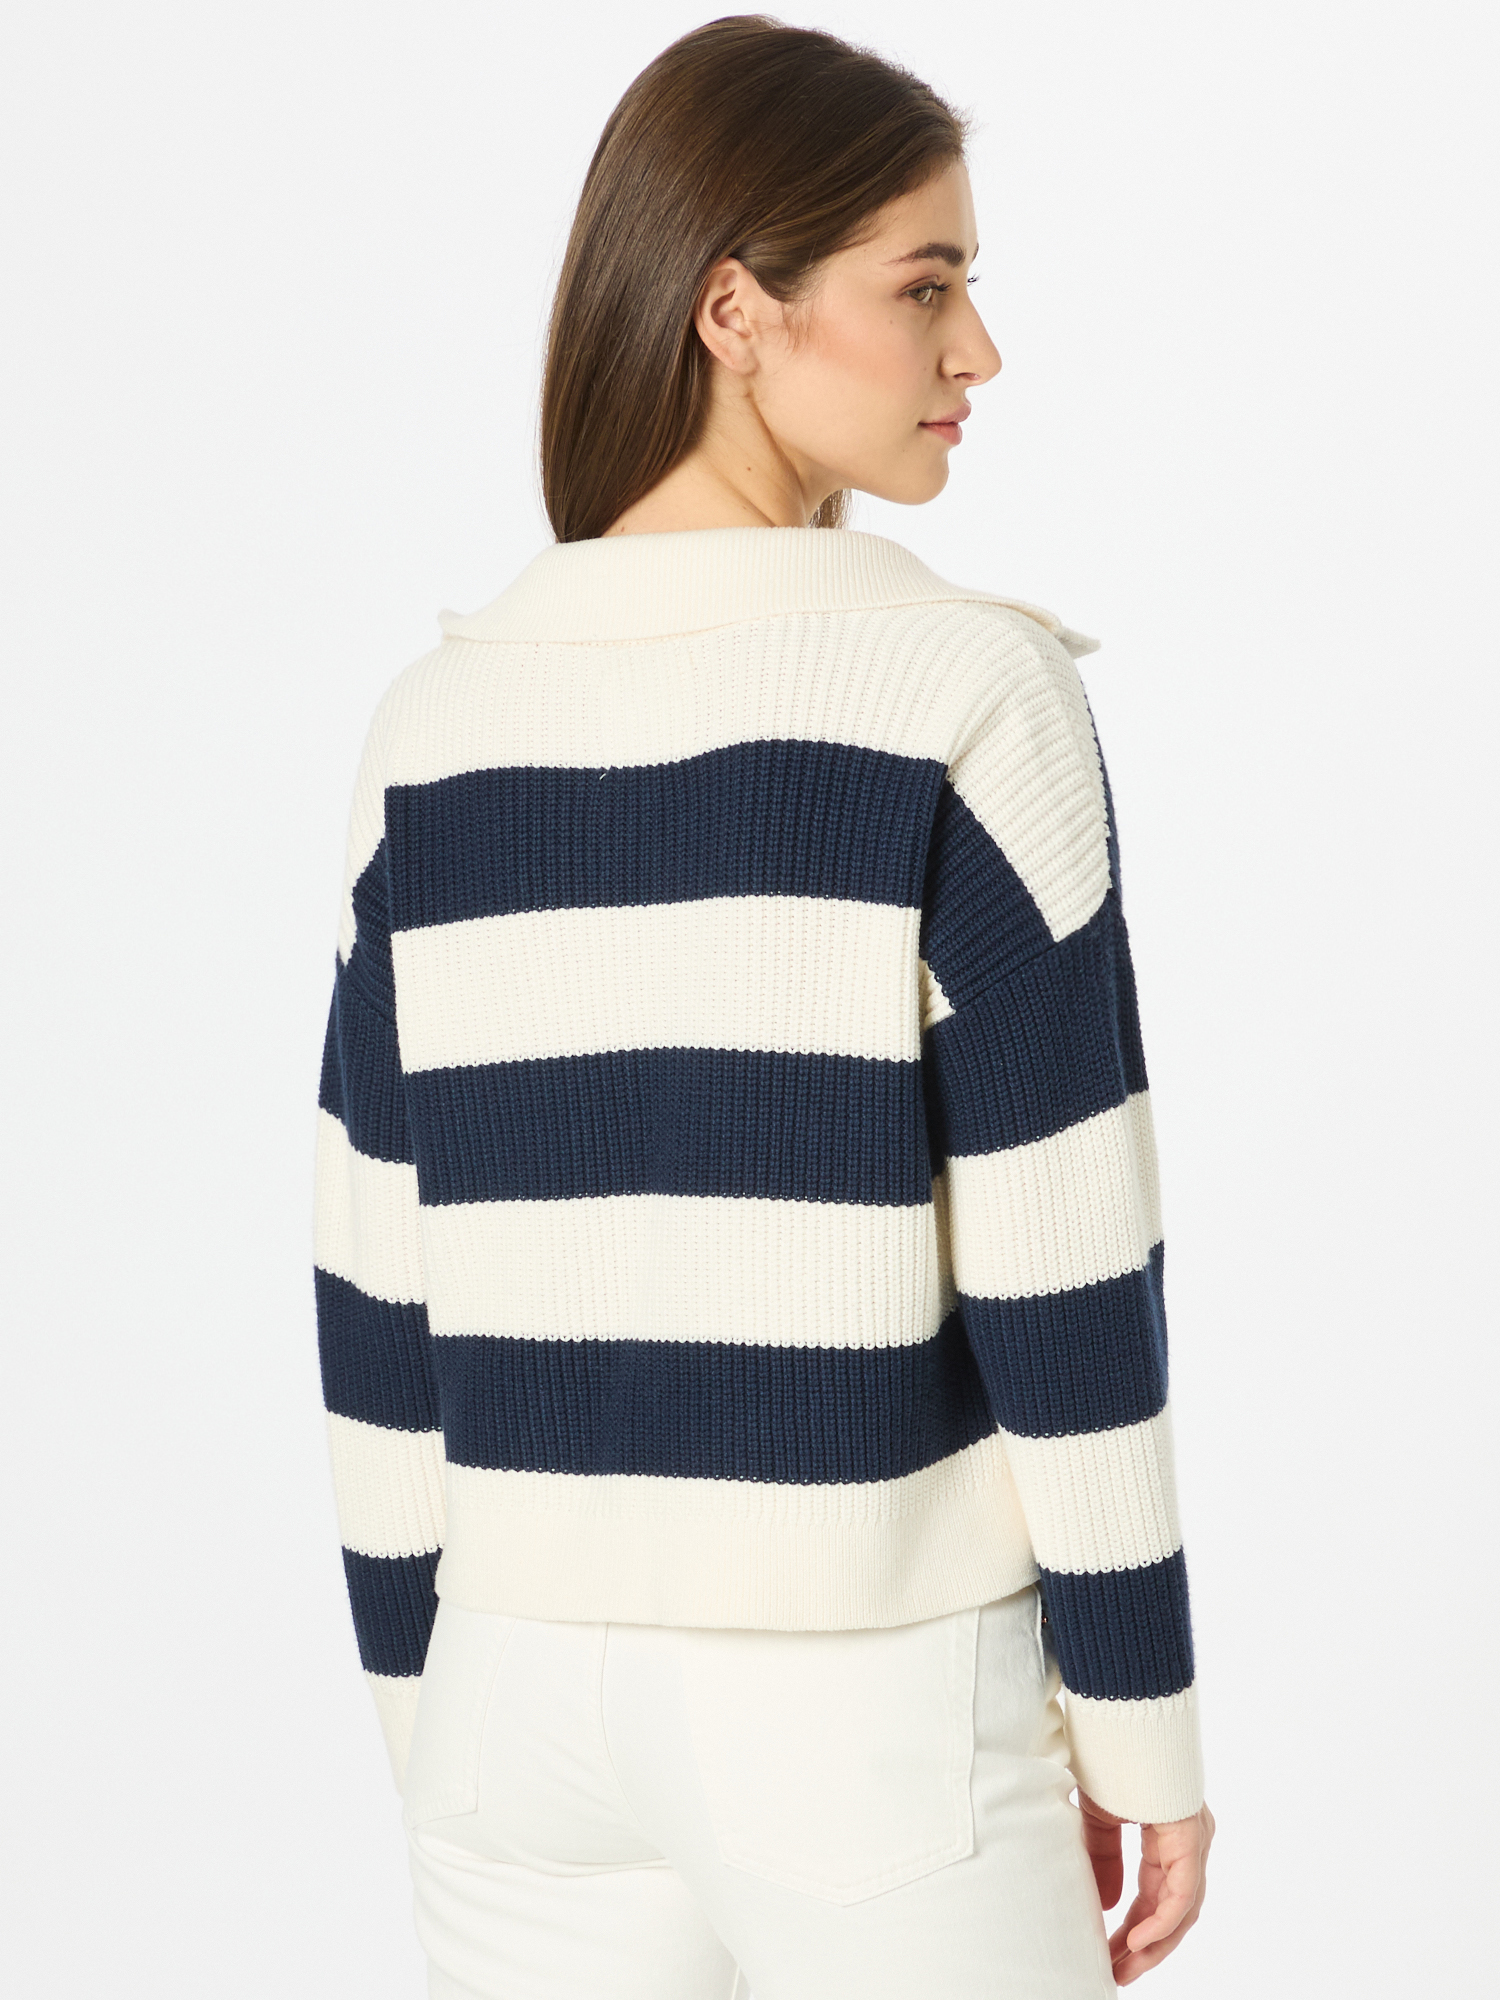 Abercrombie & Fitch Pullover in Weiß, Navy 